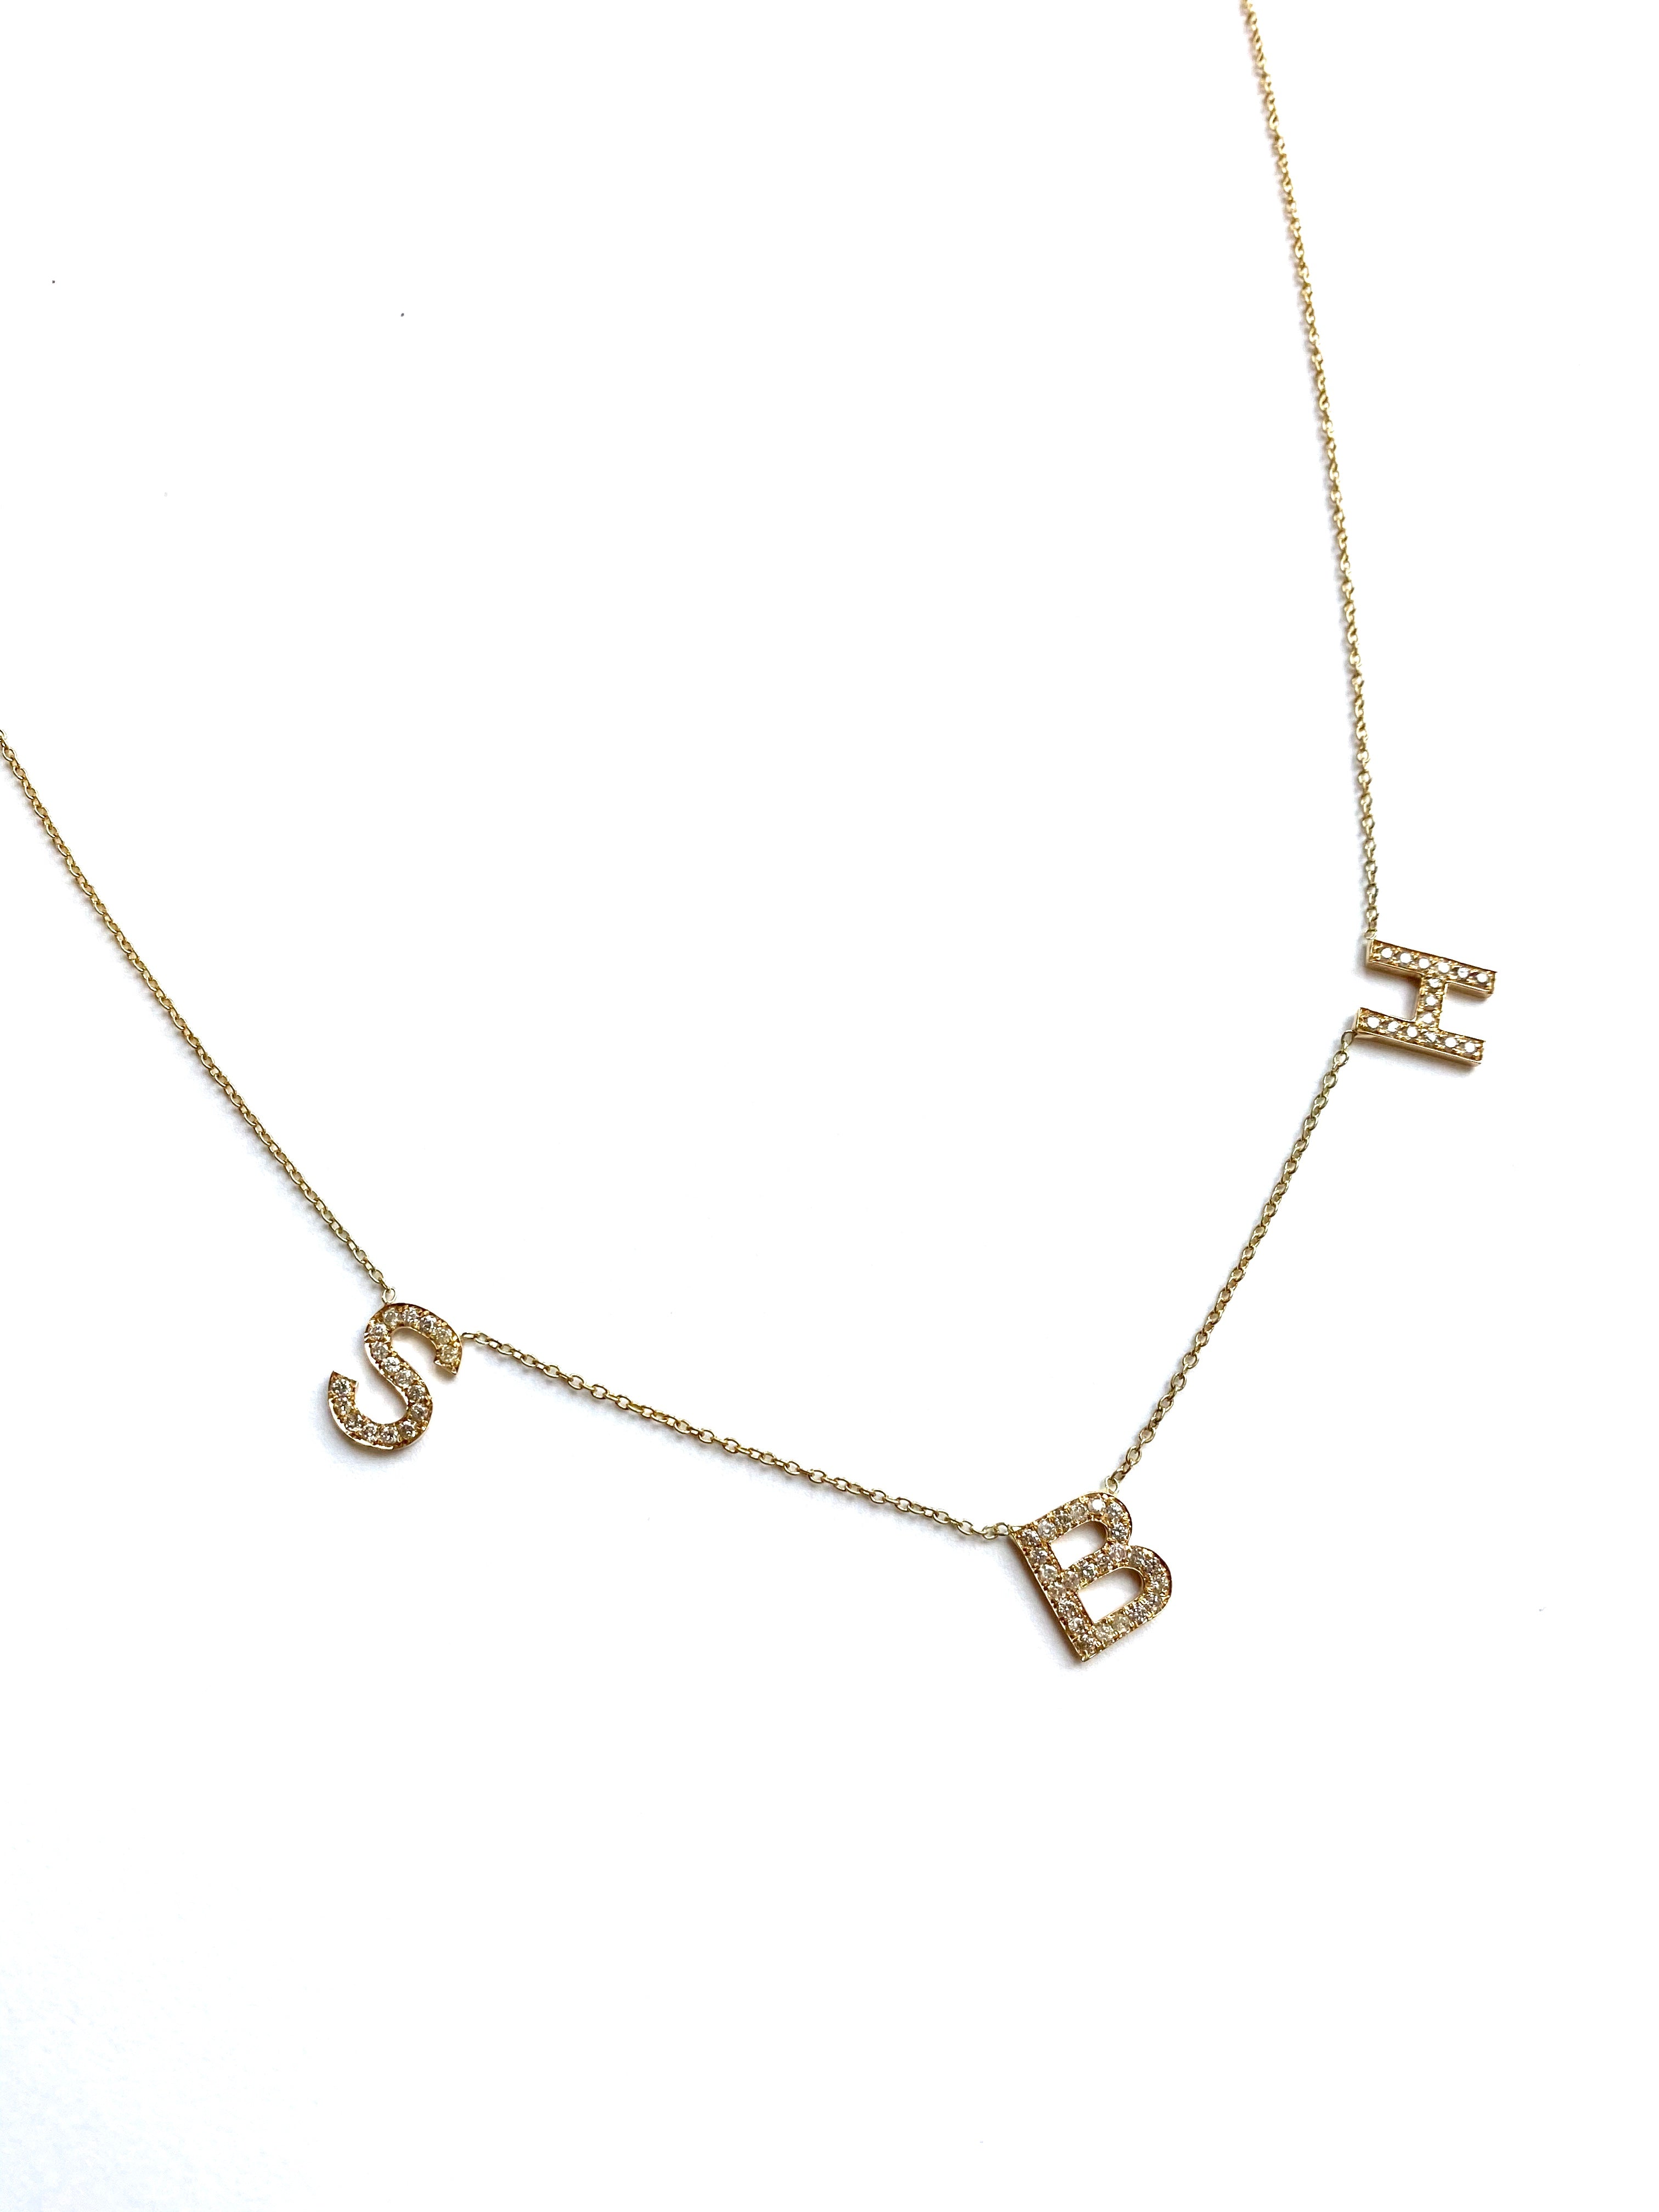 Custom Initial Necklace (Up to 7 Letters) | S-kin Studio Jewelry | Reviews  on Judge.me